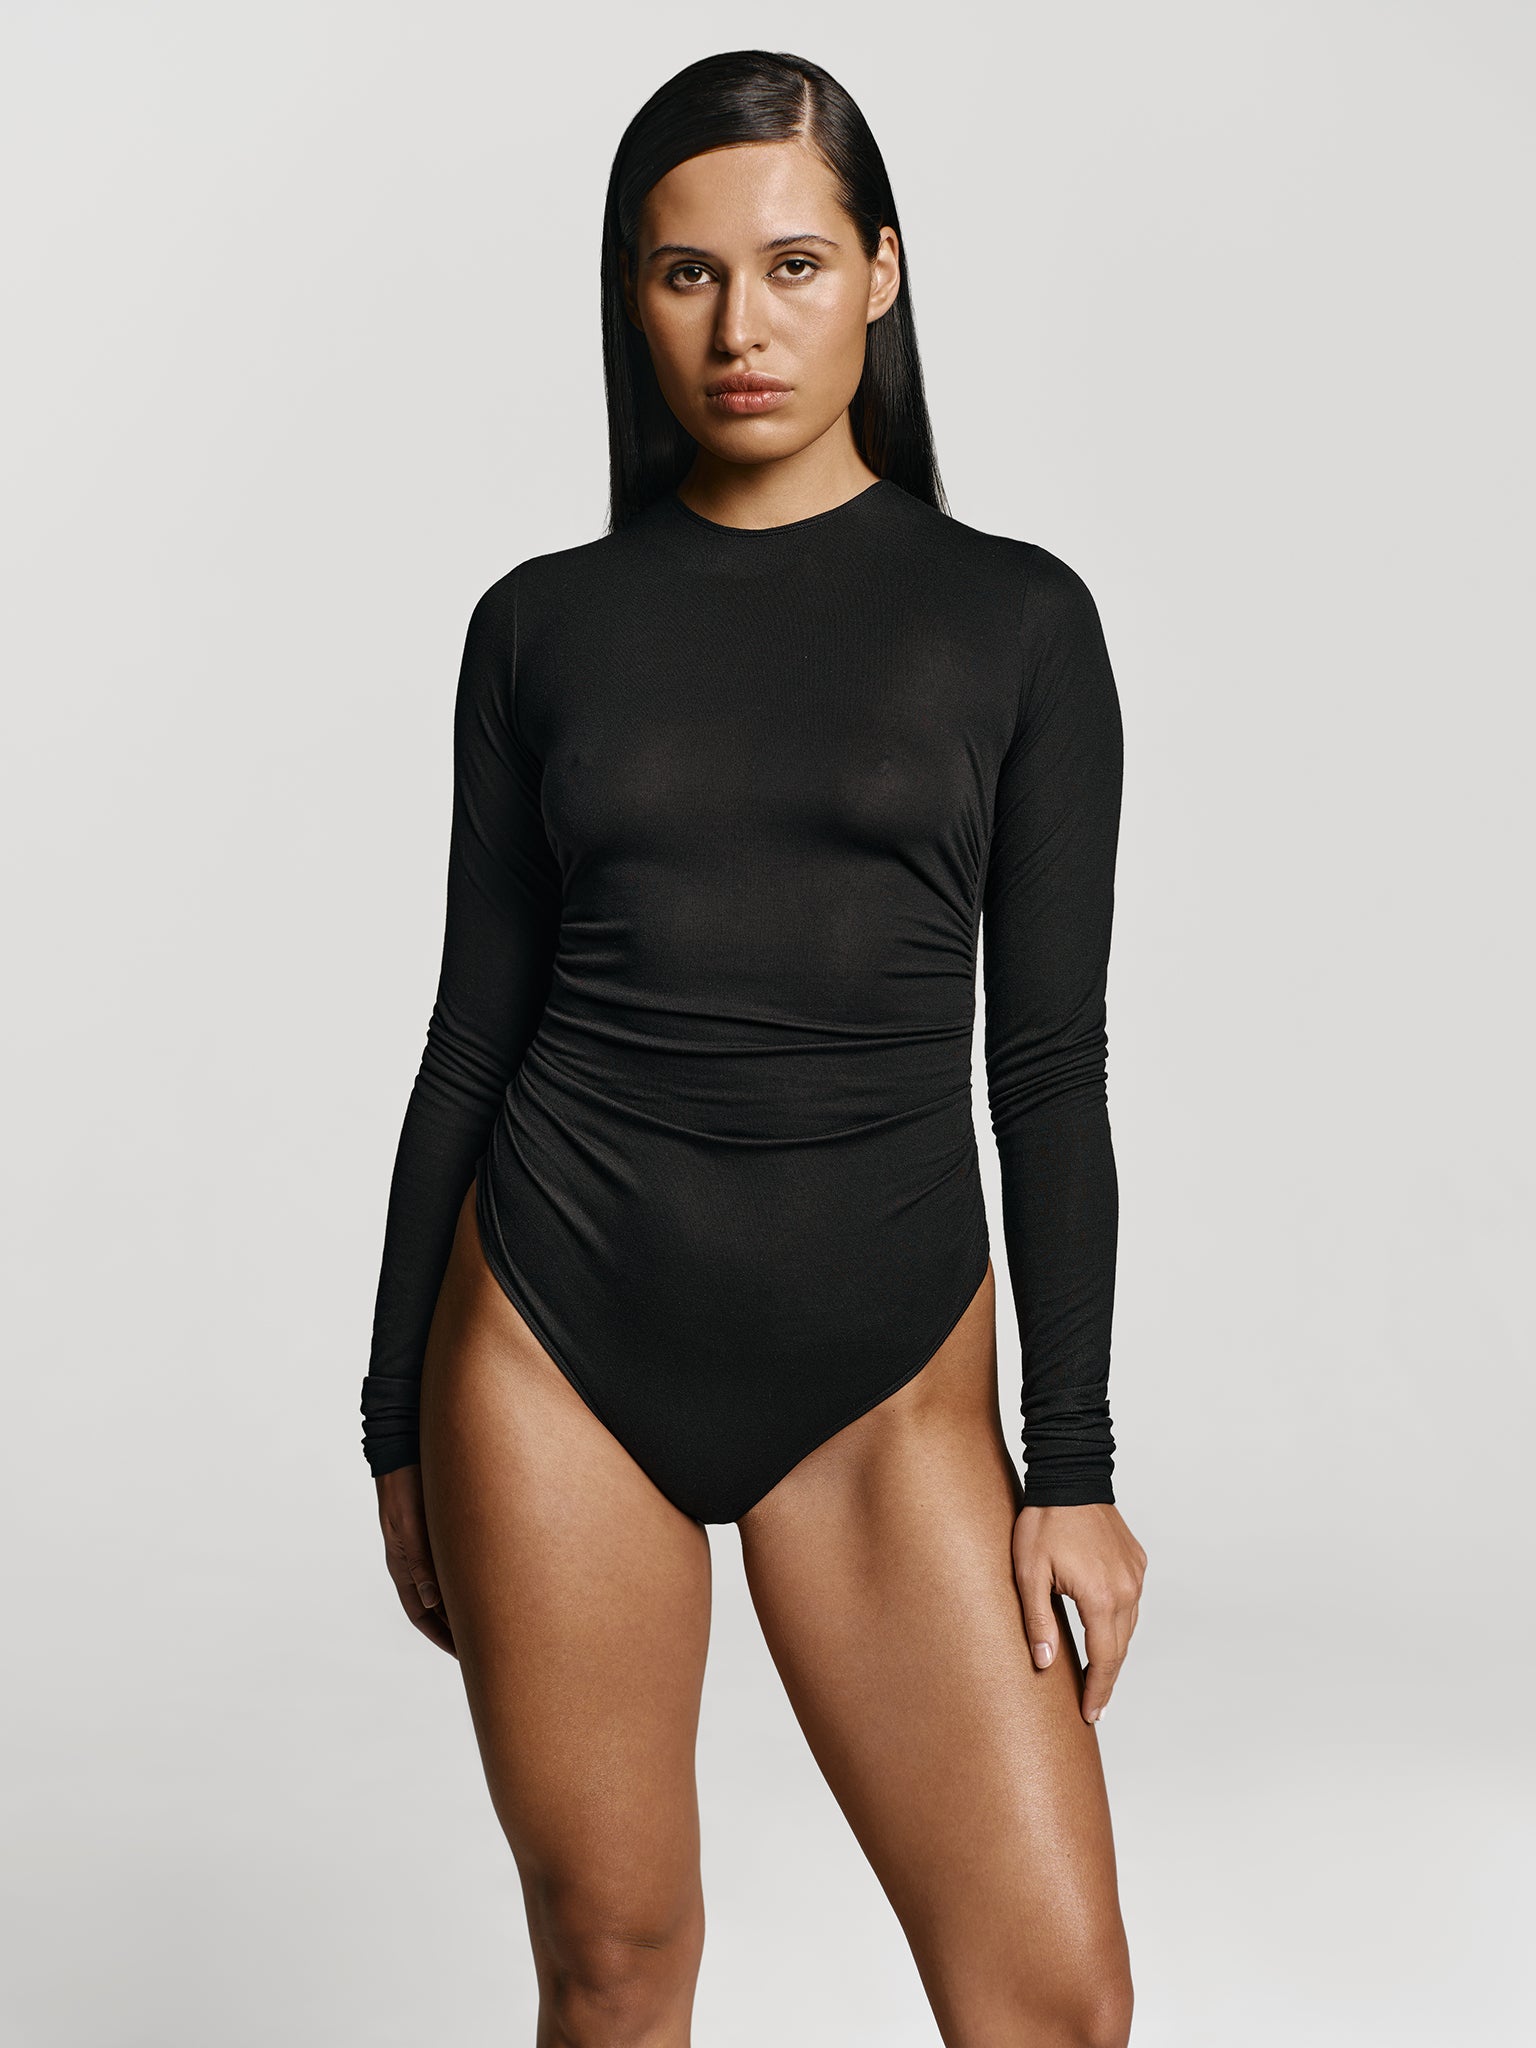 Medium full shot of a girl in a black long sleeved bodysuit with draping at the sides and high round neckline